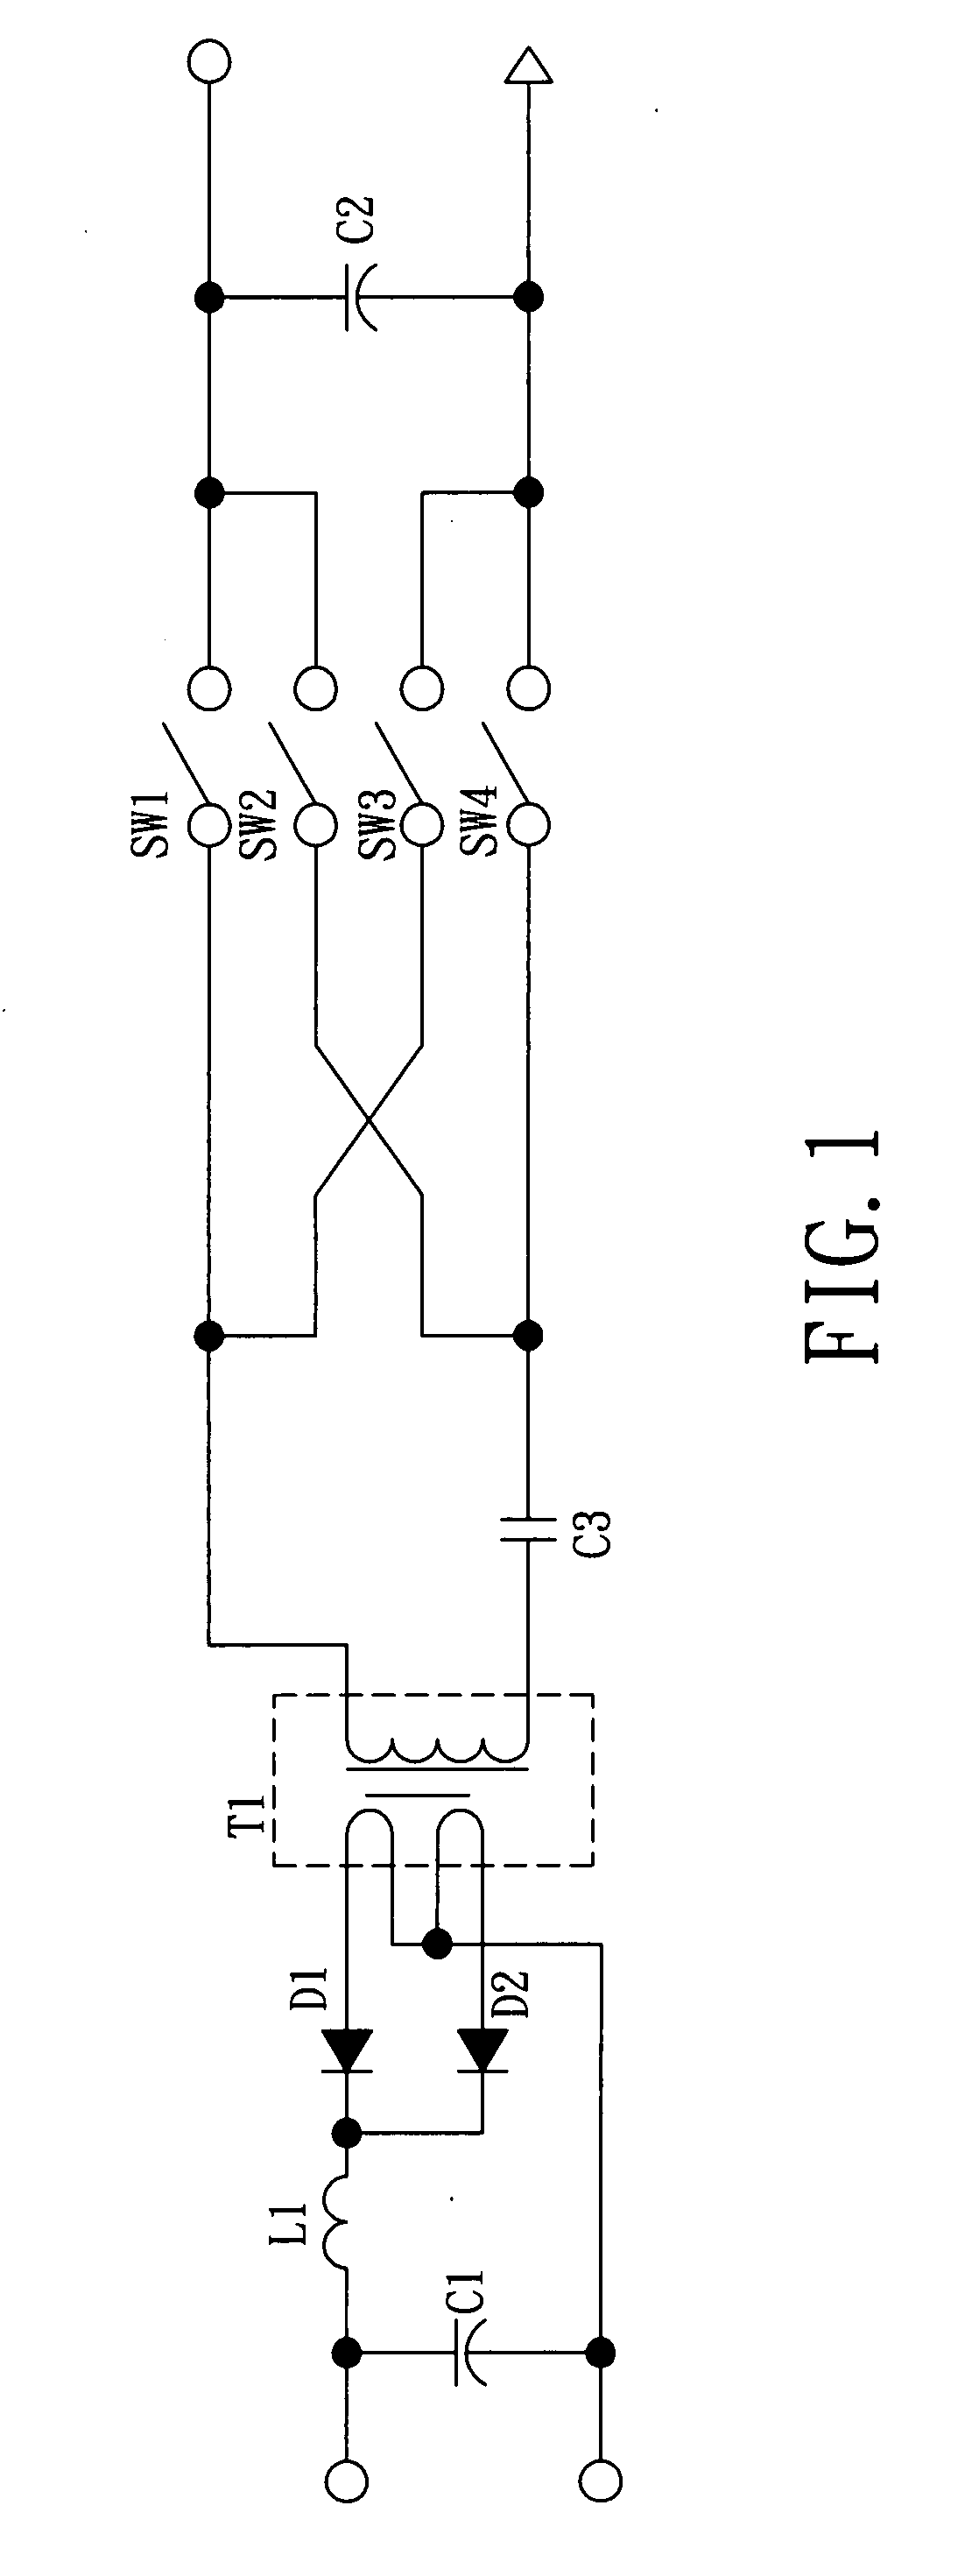 Constant frequency power supply